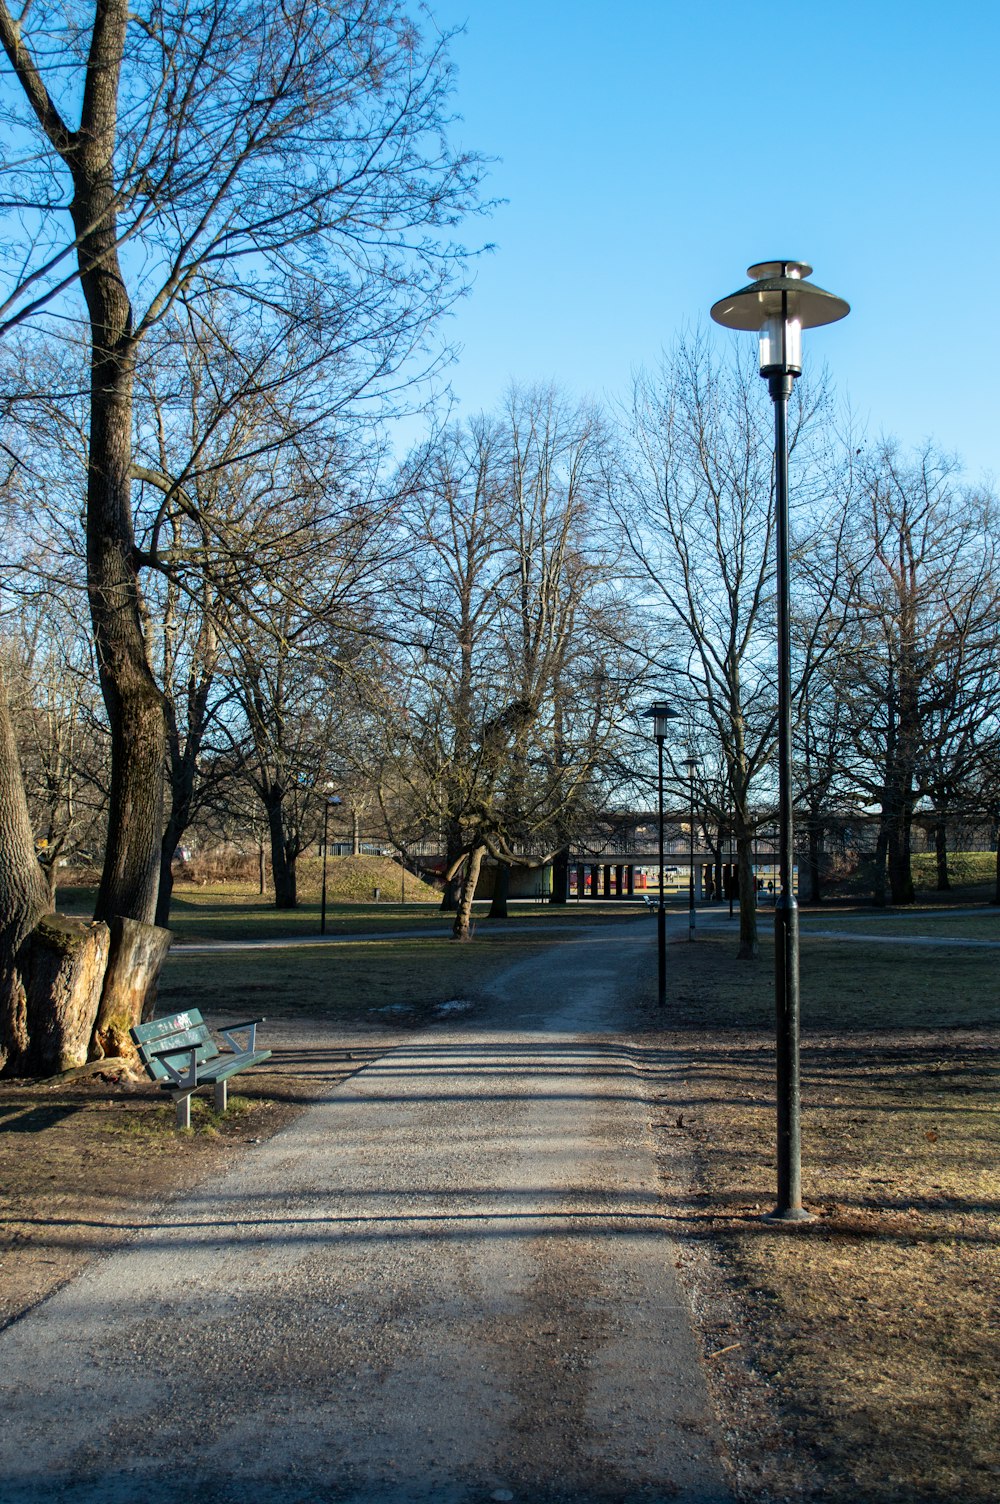 a park with a bench and a lamp post